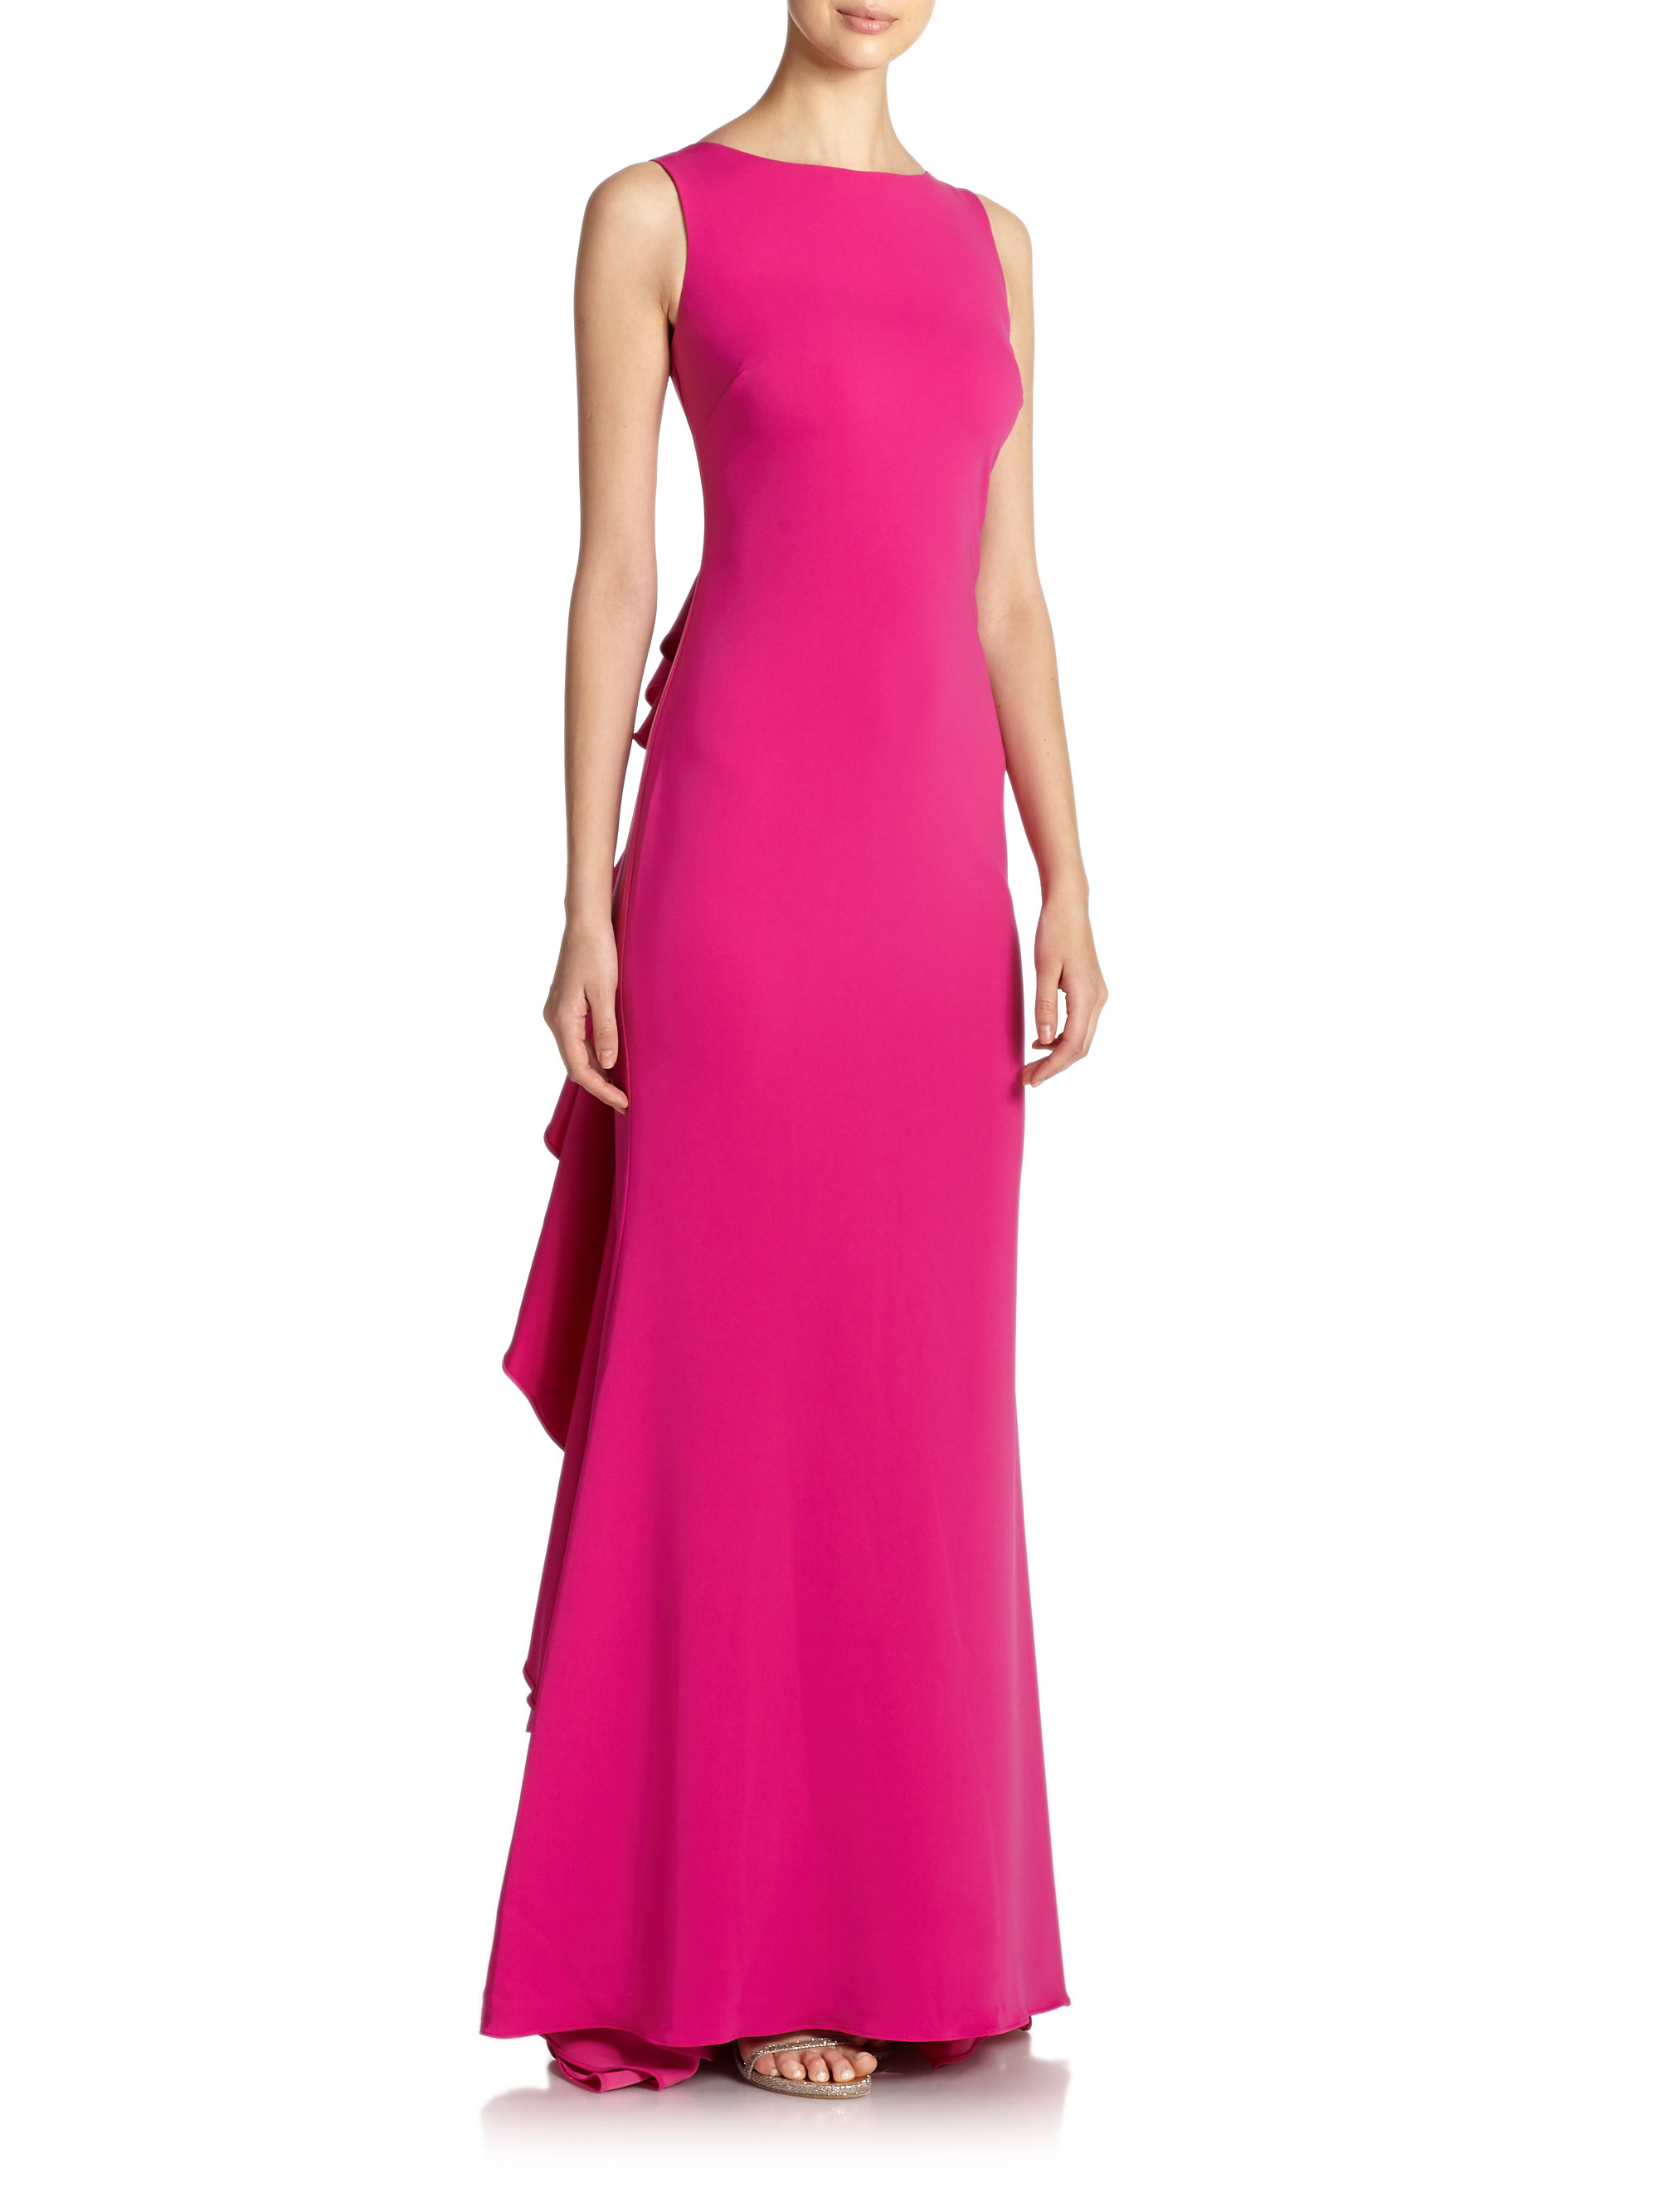 Badgley Mischka Synthetic Ruffle-back Evening Gown in Fuchsia (Pink) - Lyst